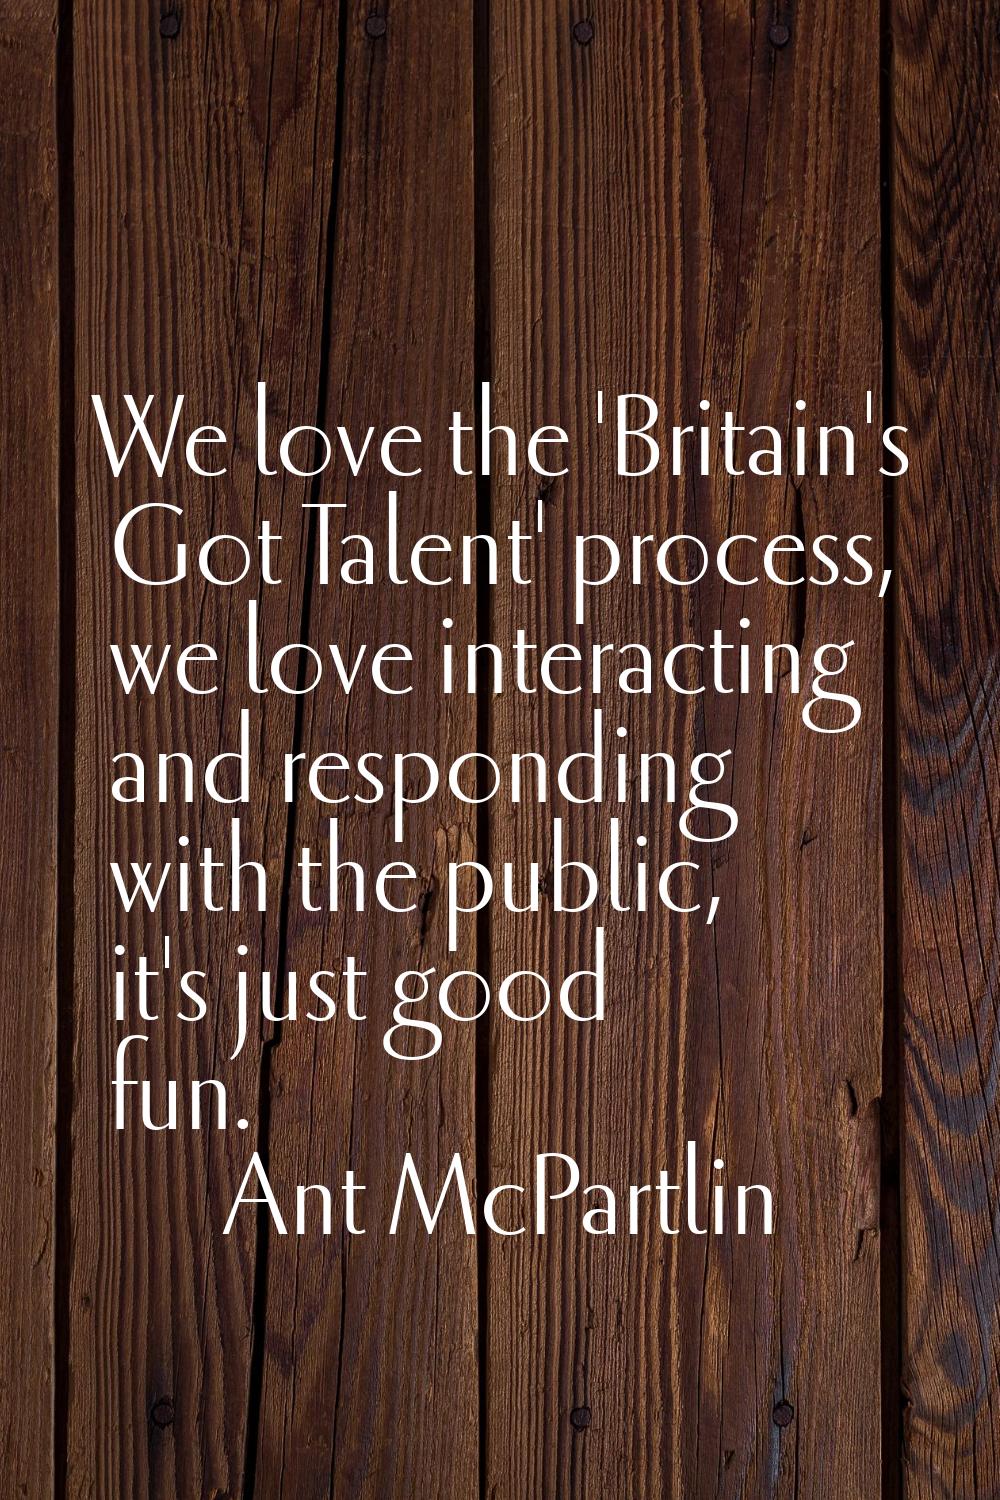 We love the 'Britain's Got Talent' process, we love interacting and responding with the public, it'